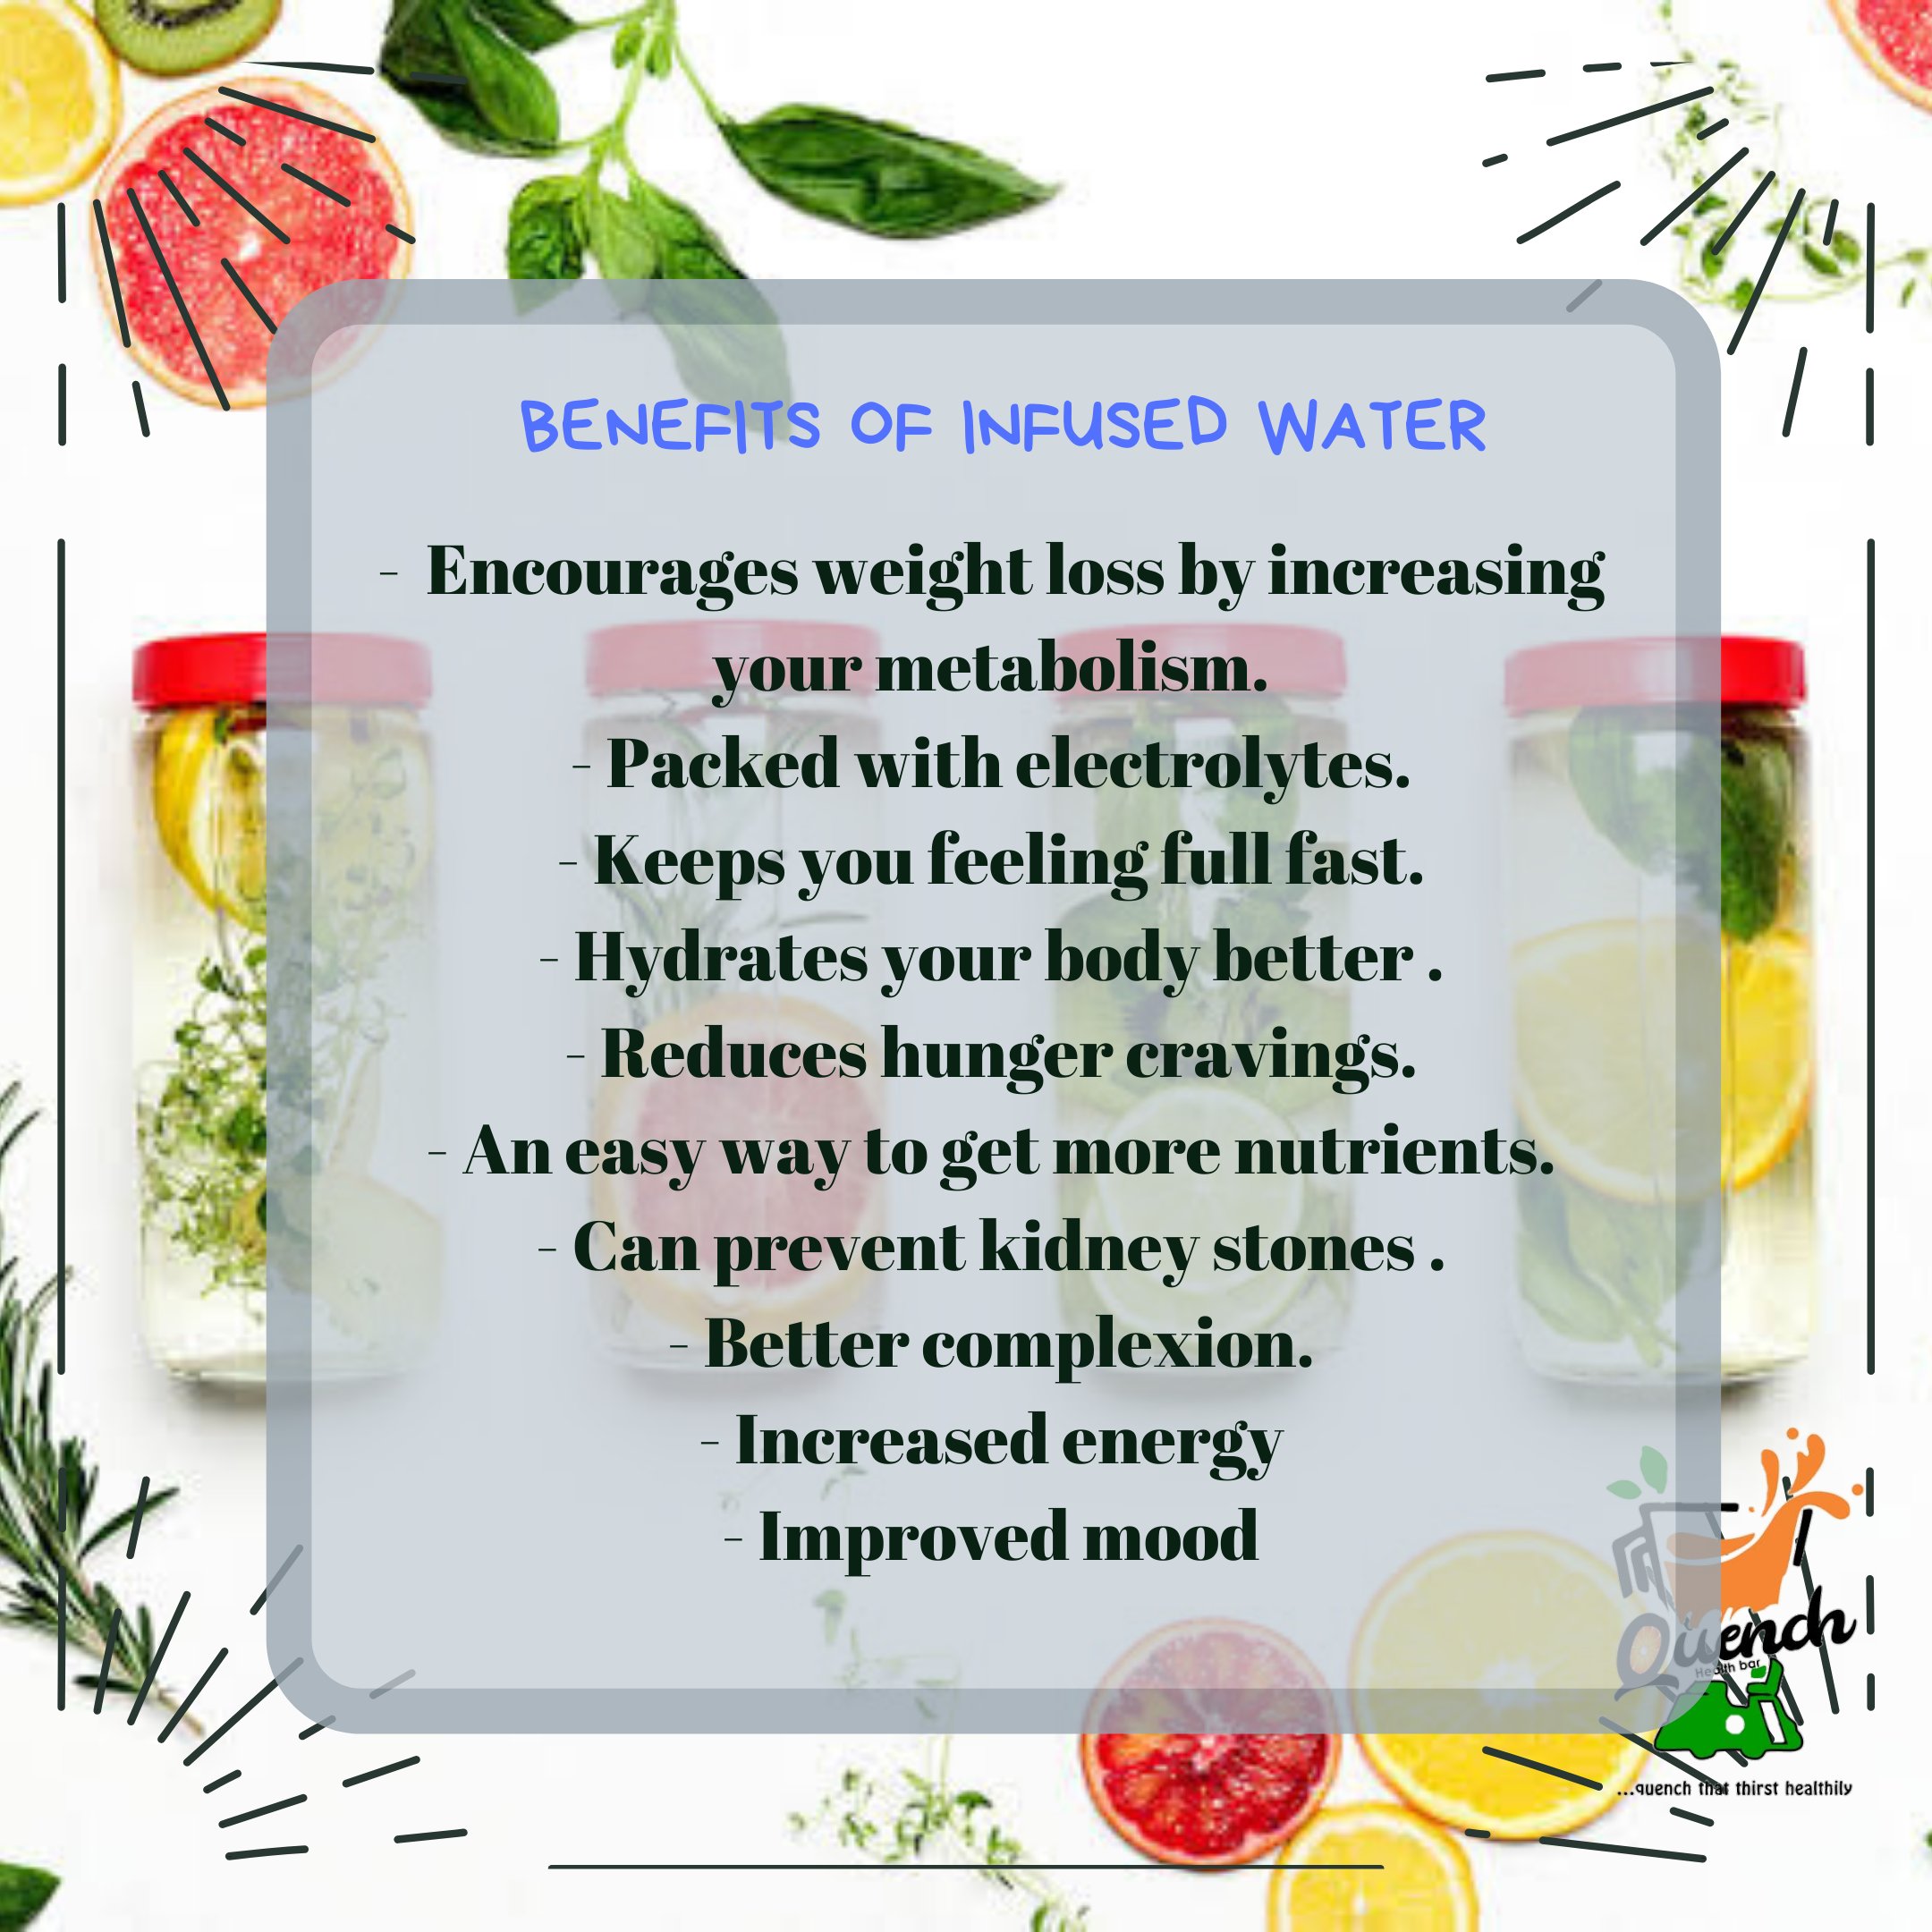 The health benefits of drinking fruit infused water Page 85 - Aqua Vida